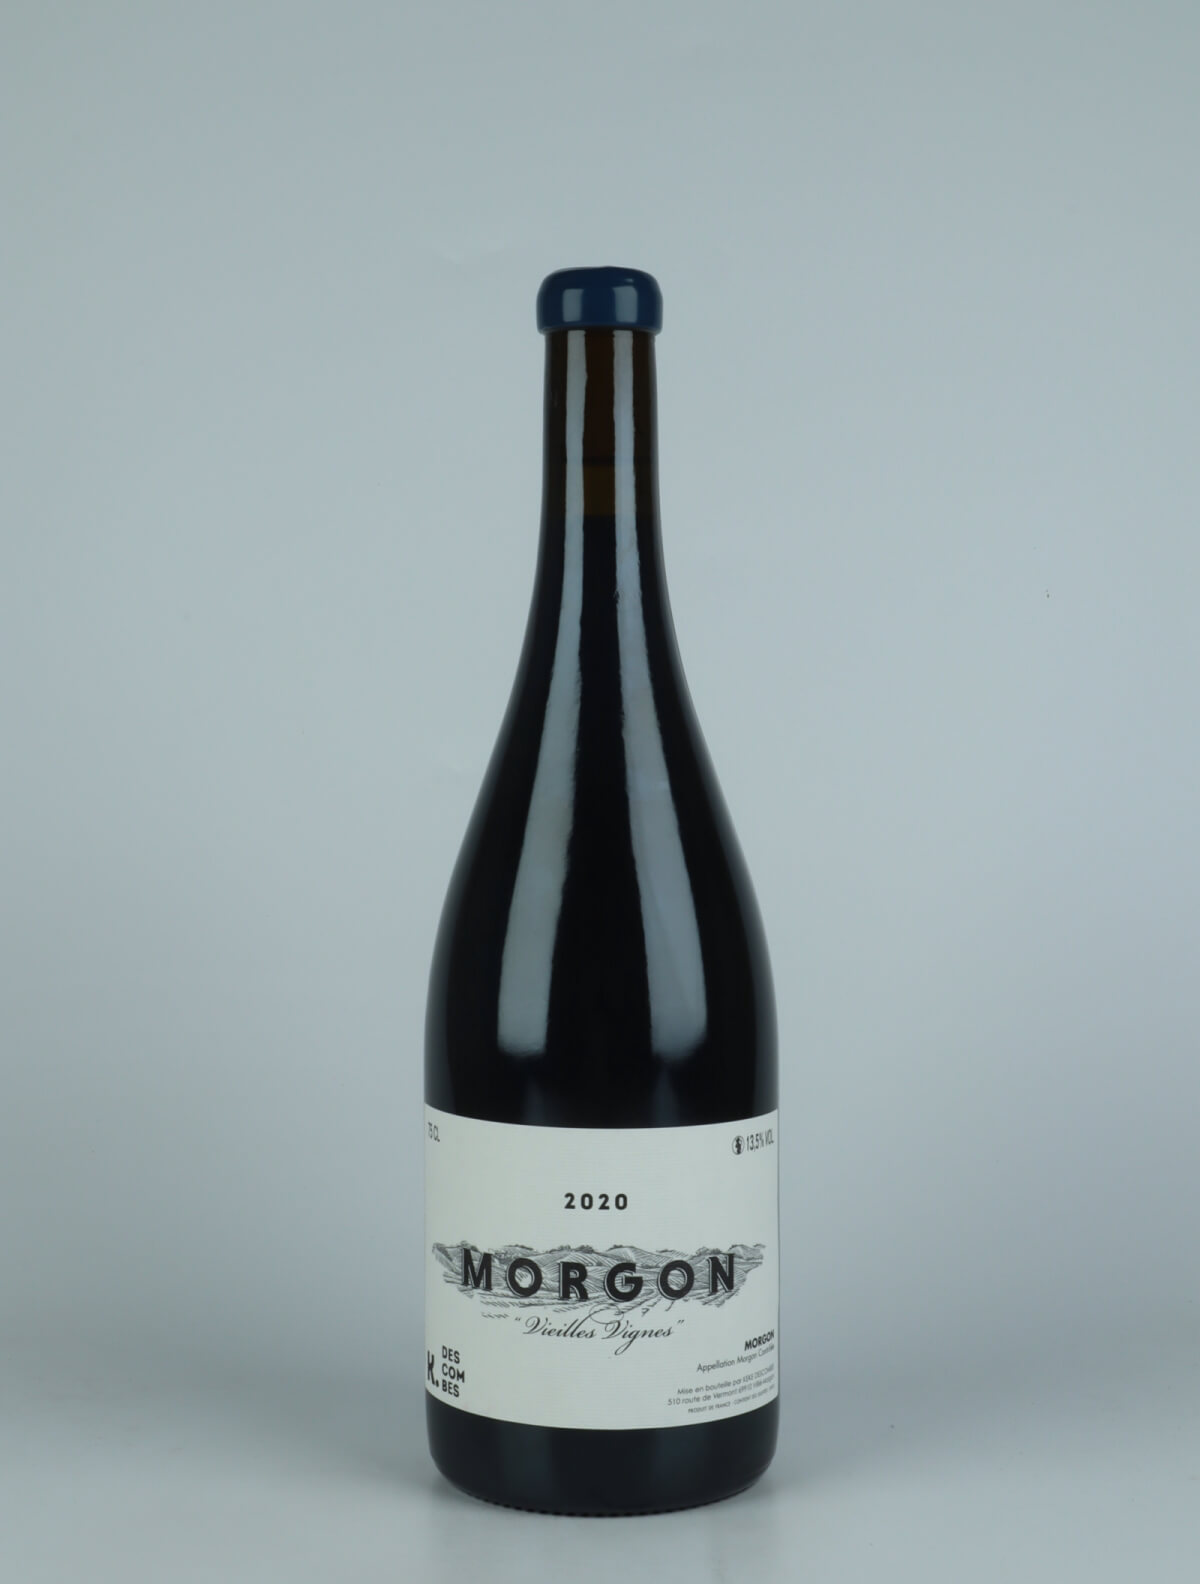 A bottle 2020 Morgon Vieilles Vignes Red wine from Kewin Descombes, Beaujolais in France